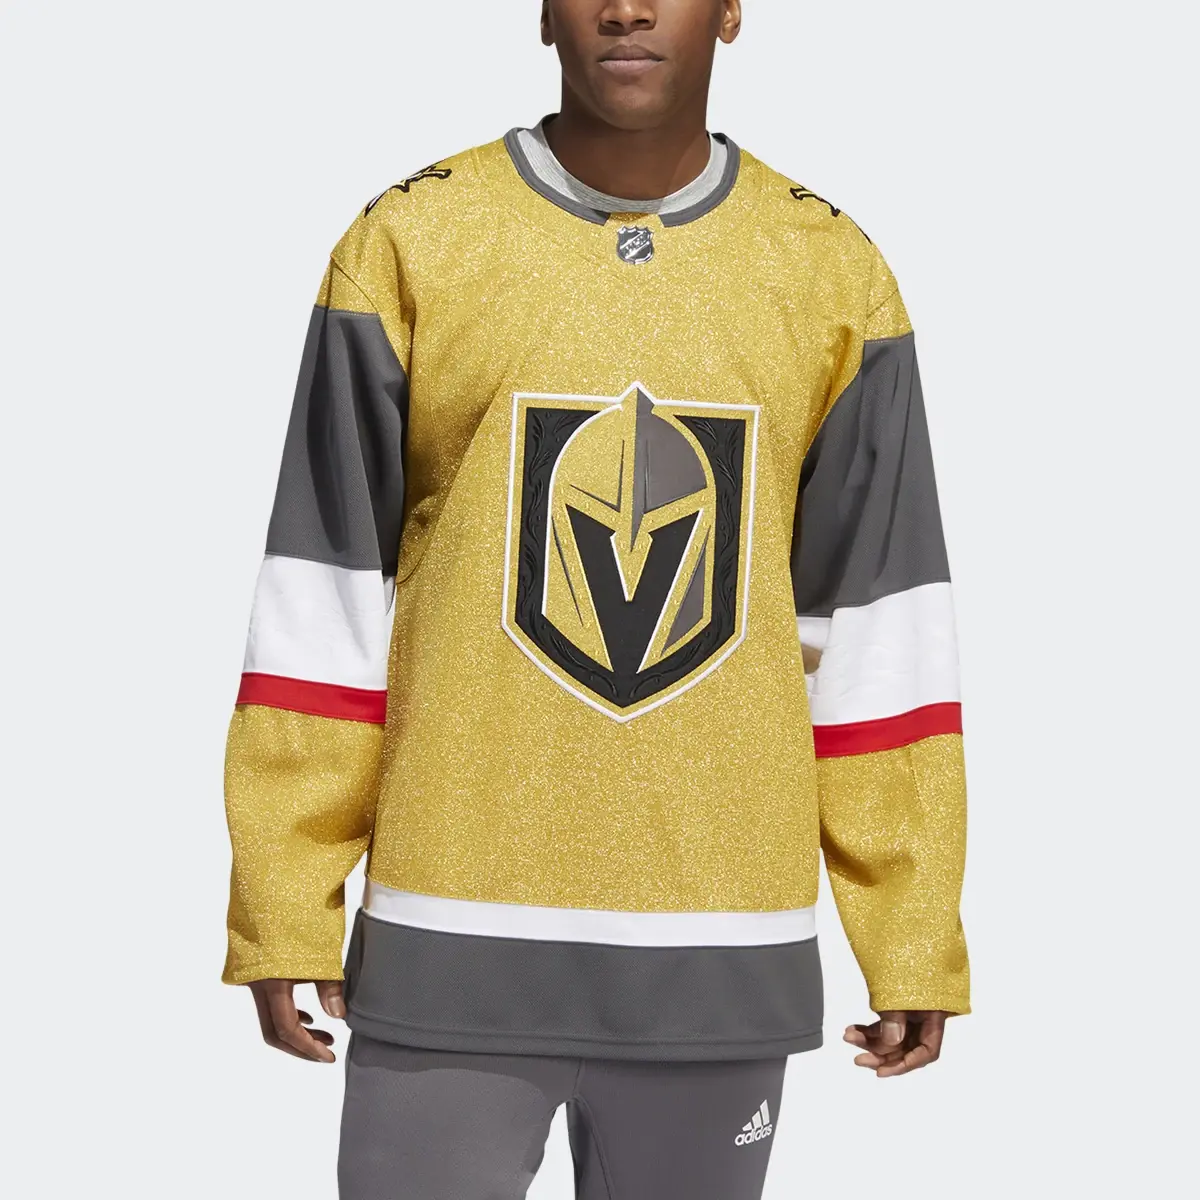 Adidas Golden Knights Home Authentic Jersey. 1